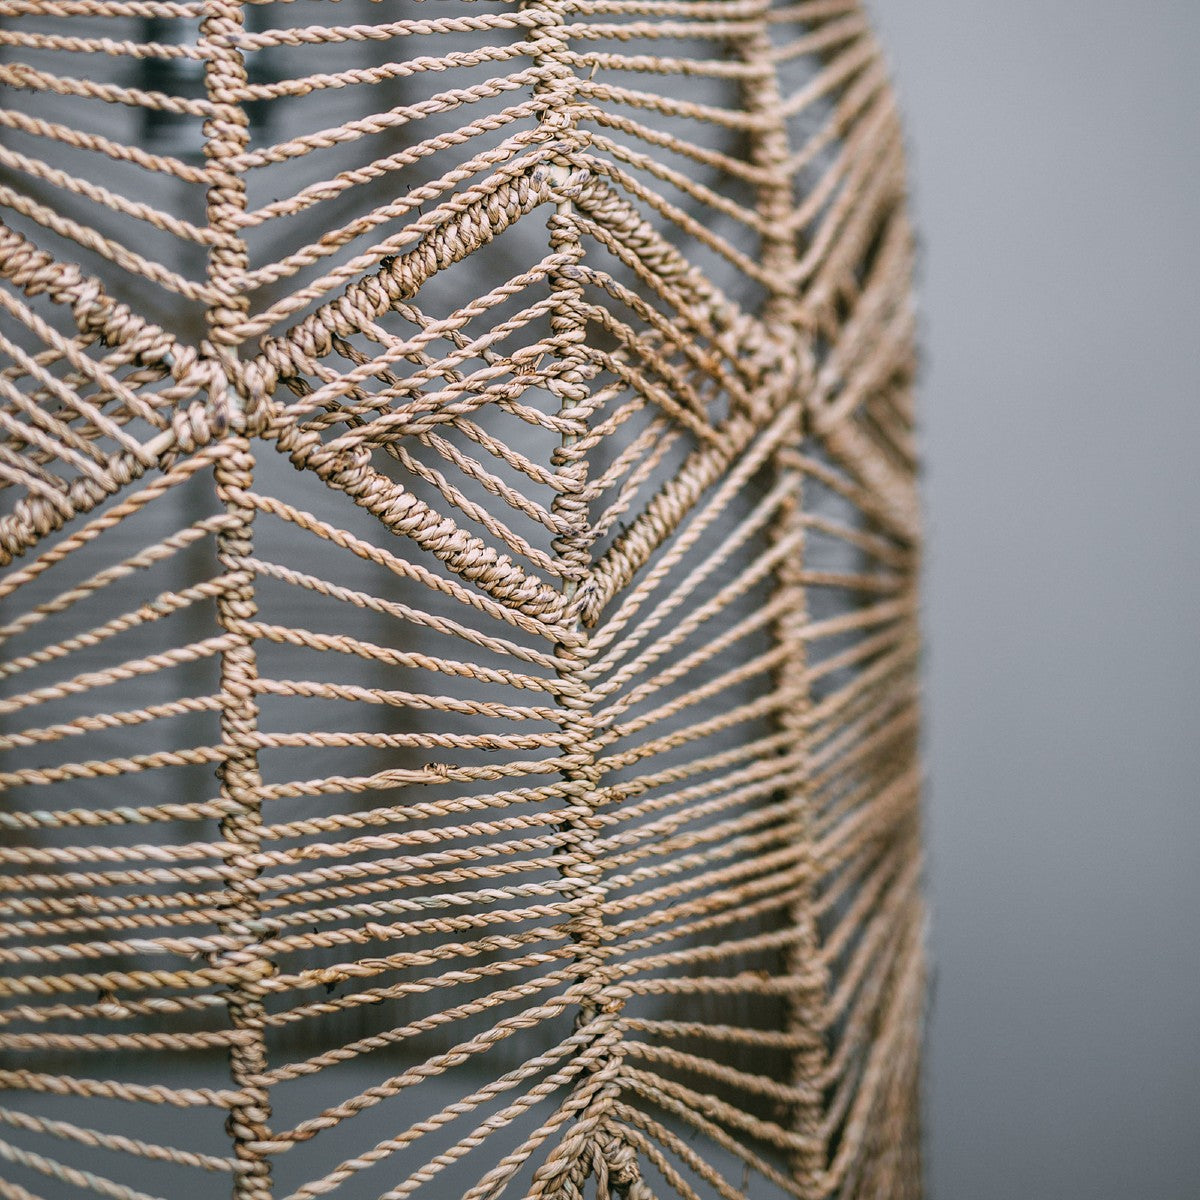 hand woven seagrass pendant light photo shows fine detail of the seagrass wrapped around a frame, diamond pattern looks divine.